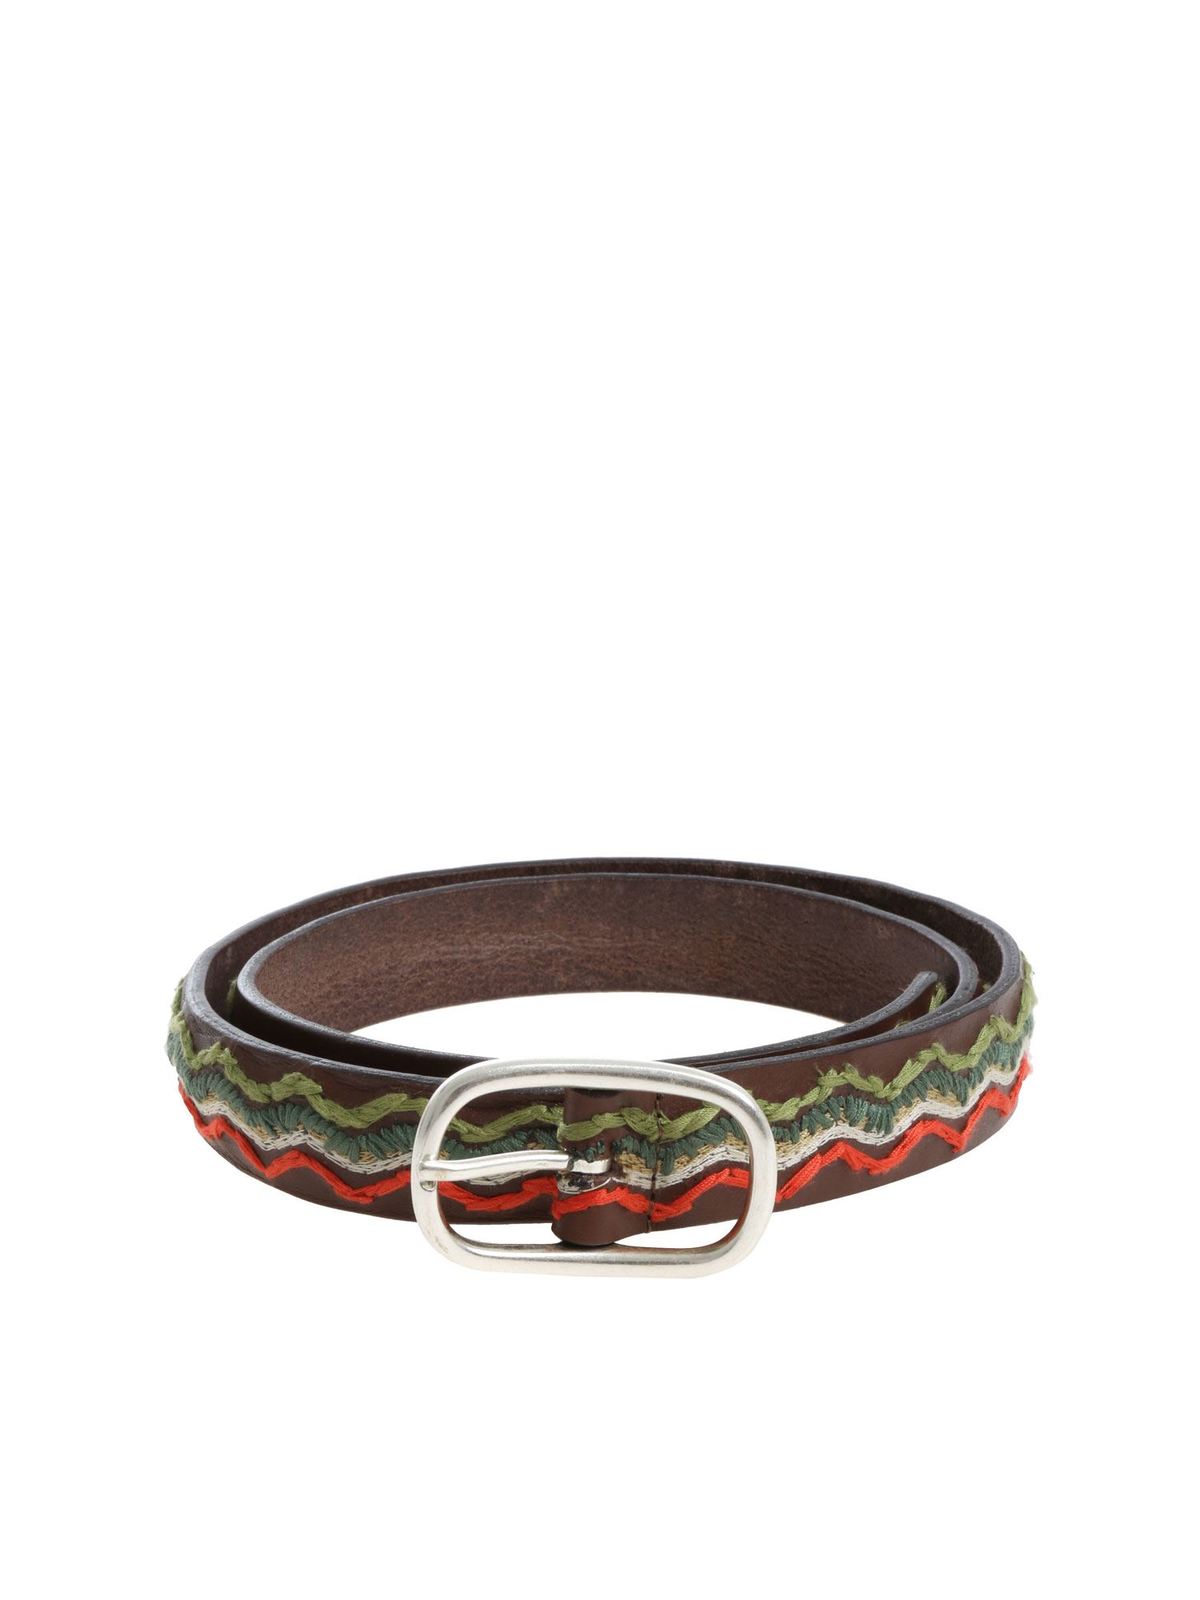 ANDREA D'AMICO BROWN BELT WITH EMBROIDERY